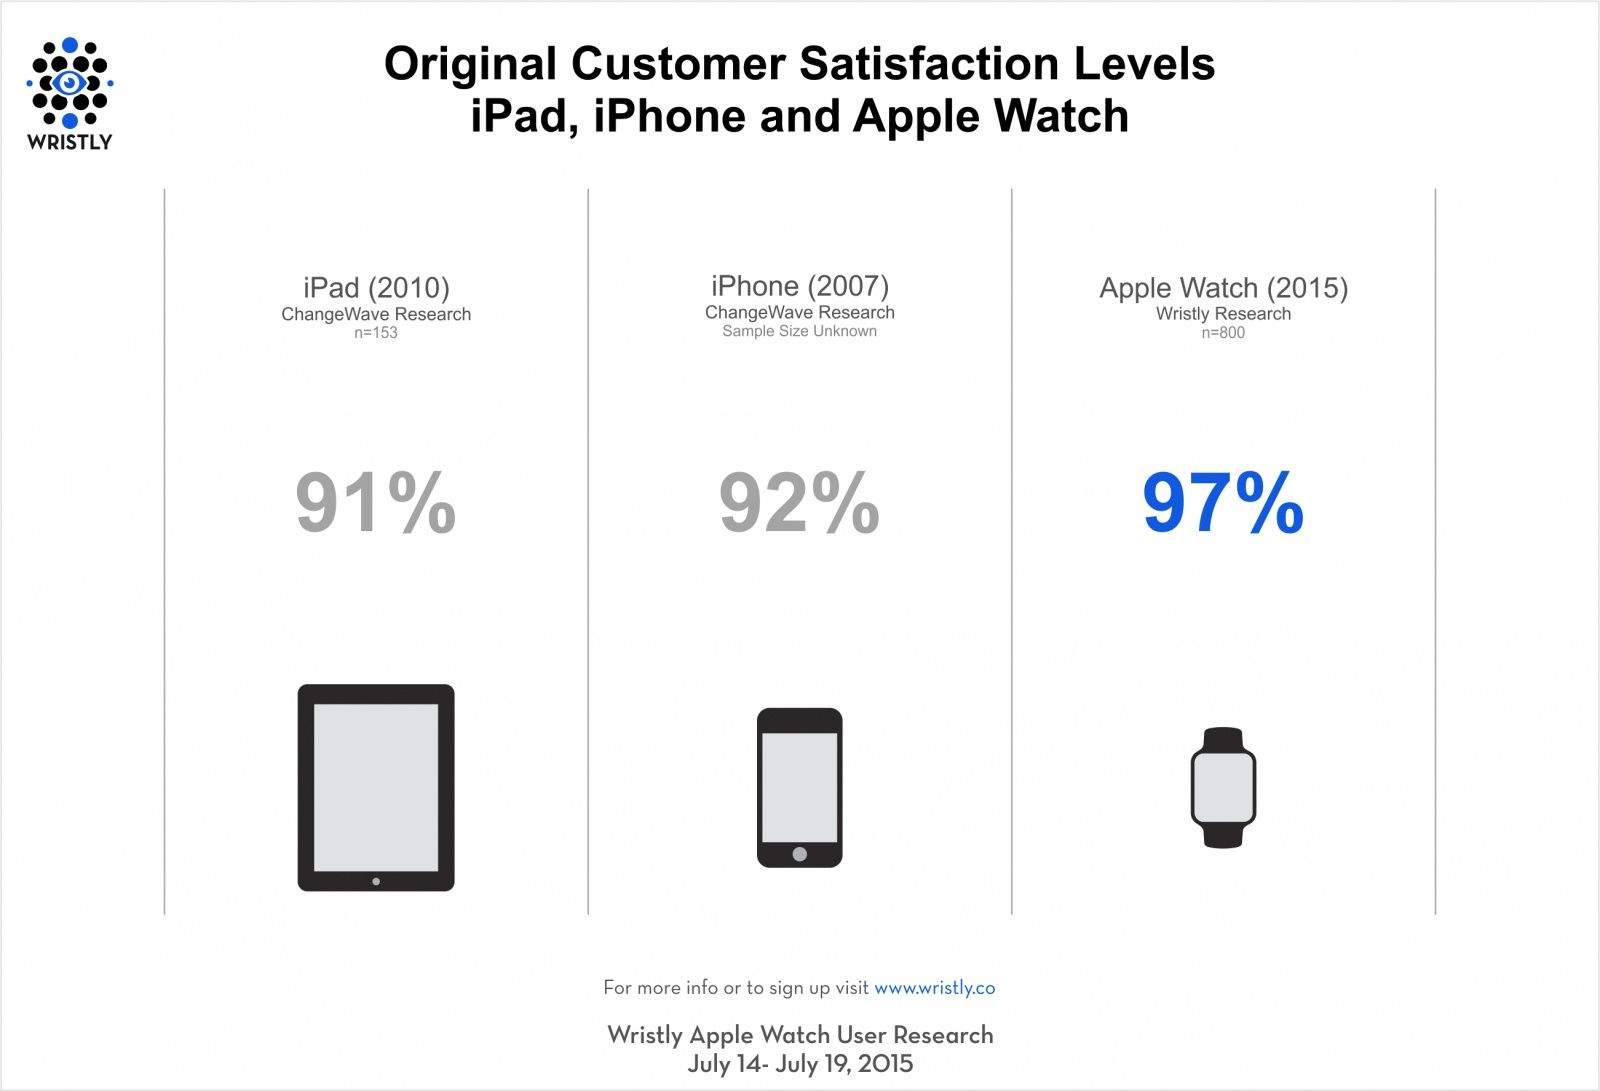 Apple Watch customers are some of the most satisfied people around.